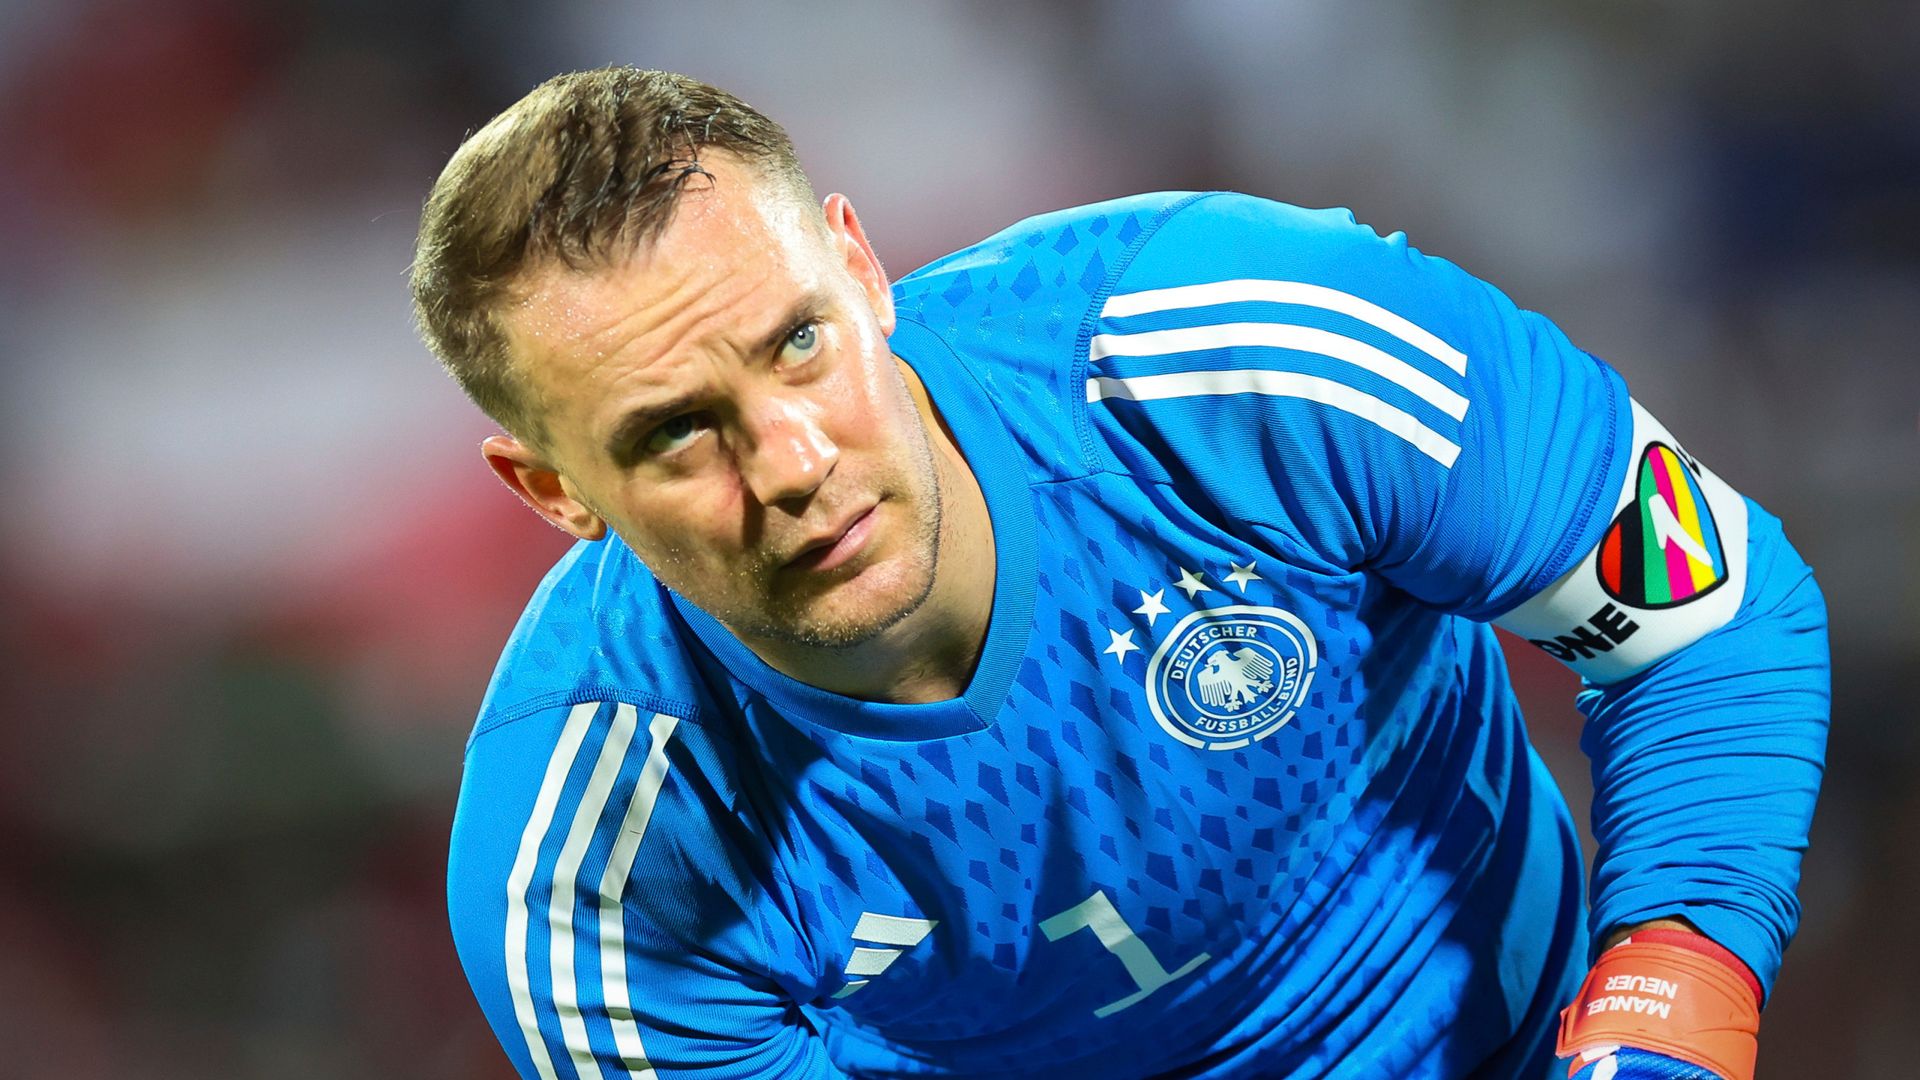 Neuer breaks leg in skiing accident | 'Season is over for me'